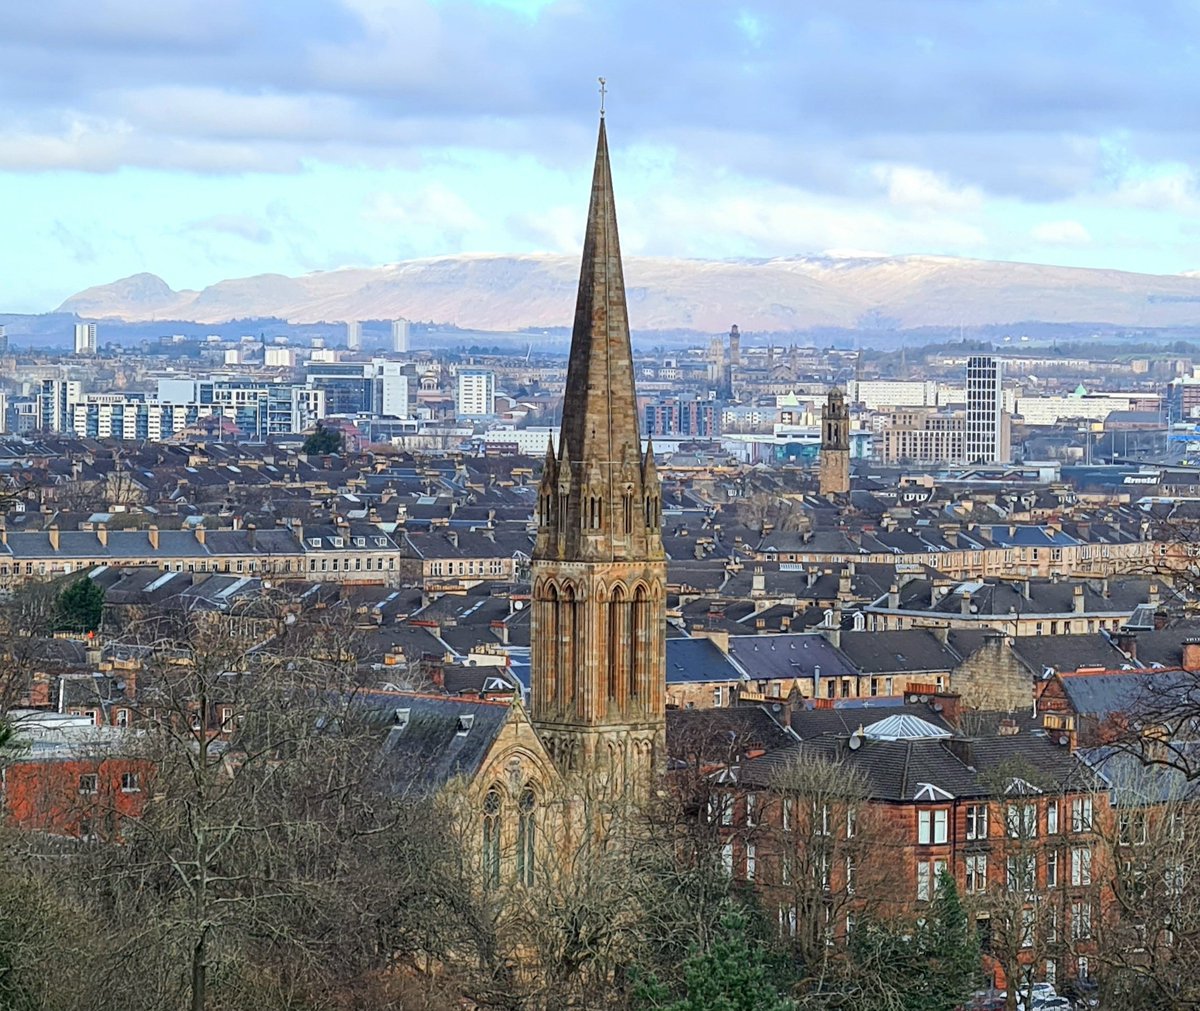 Today's view across Glasgow and beyond from the flagpole in Queen's Park on the Southside of the city, with the slightest dusting of snow just visible on the highest parts of the Campsies.

#glasgow #queenspark #cityscape #thecampsies #scotland #scottishlandscapes #glasgowtoday